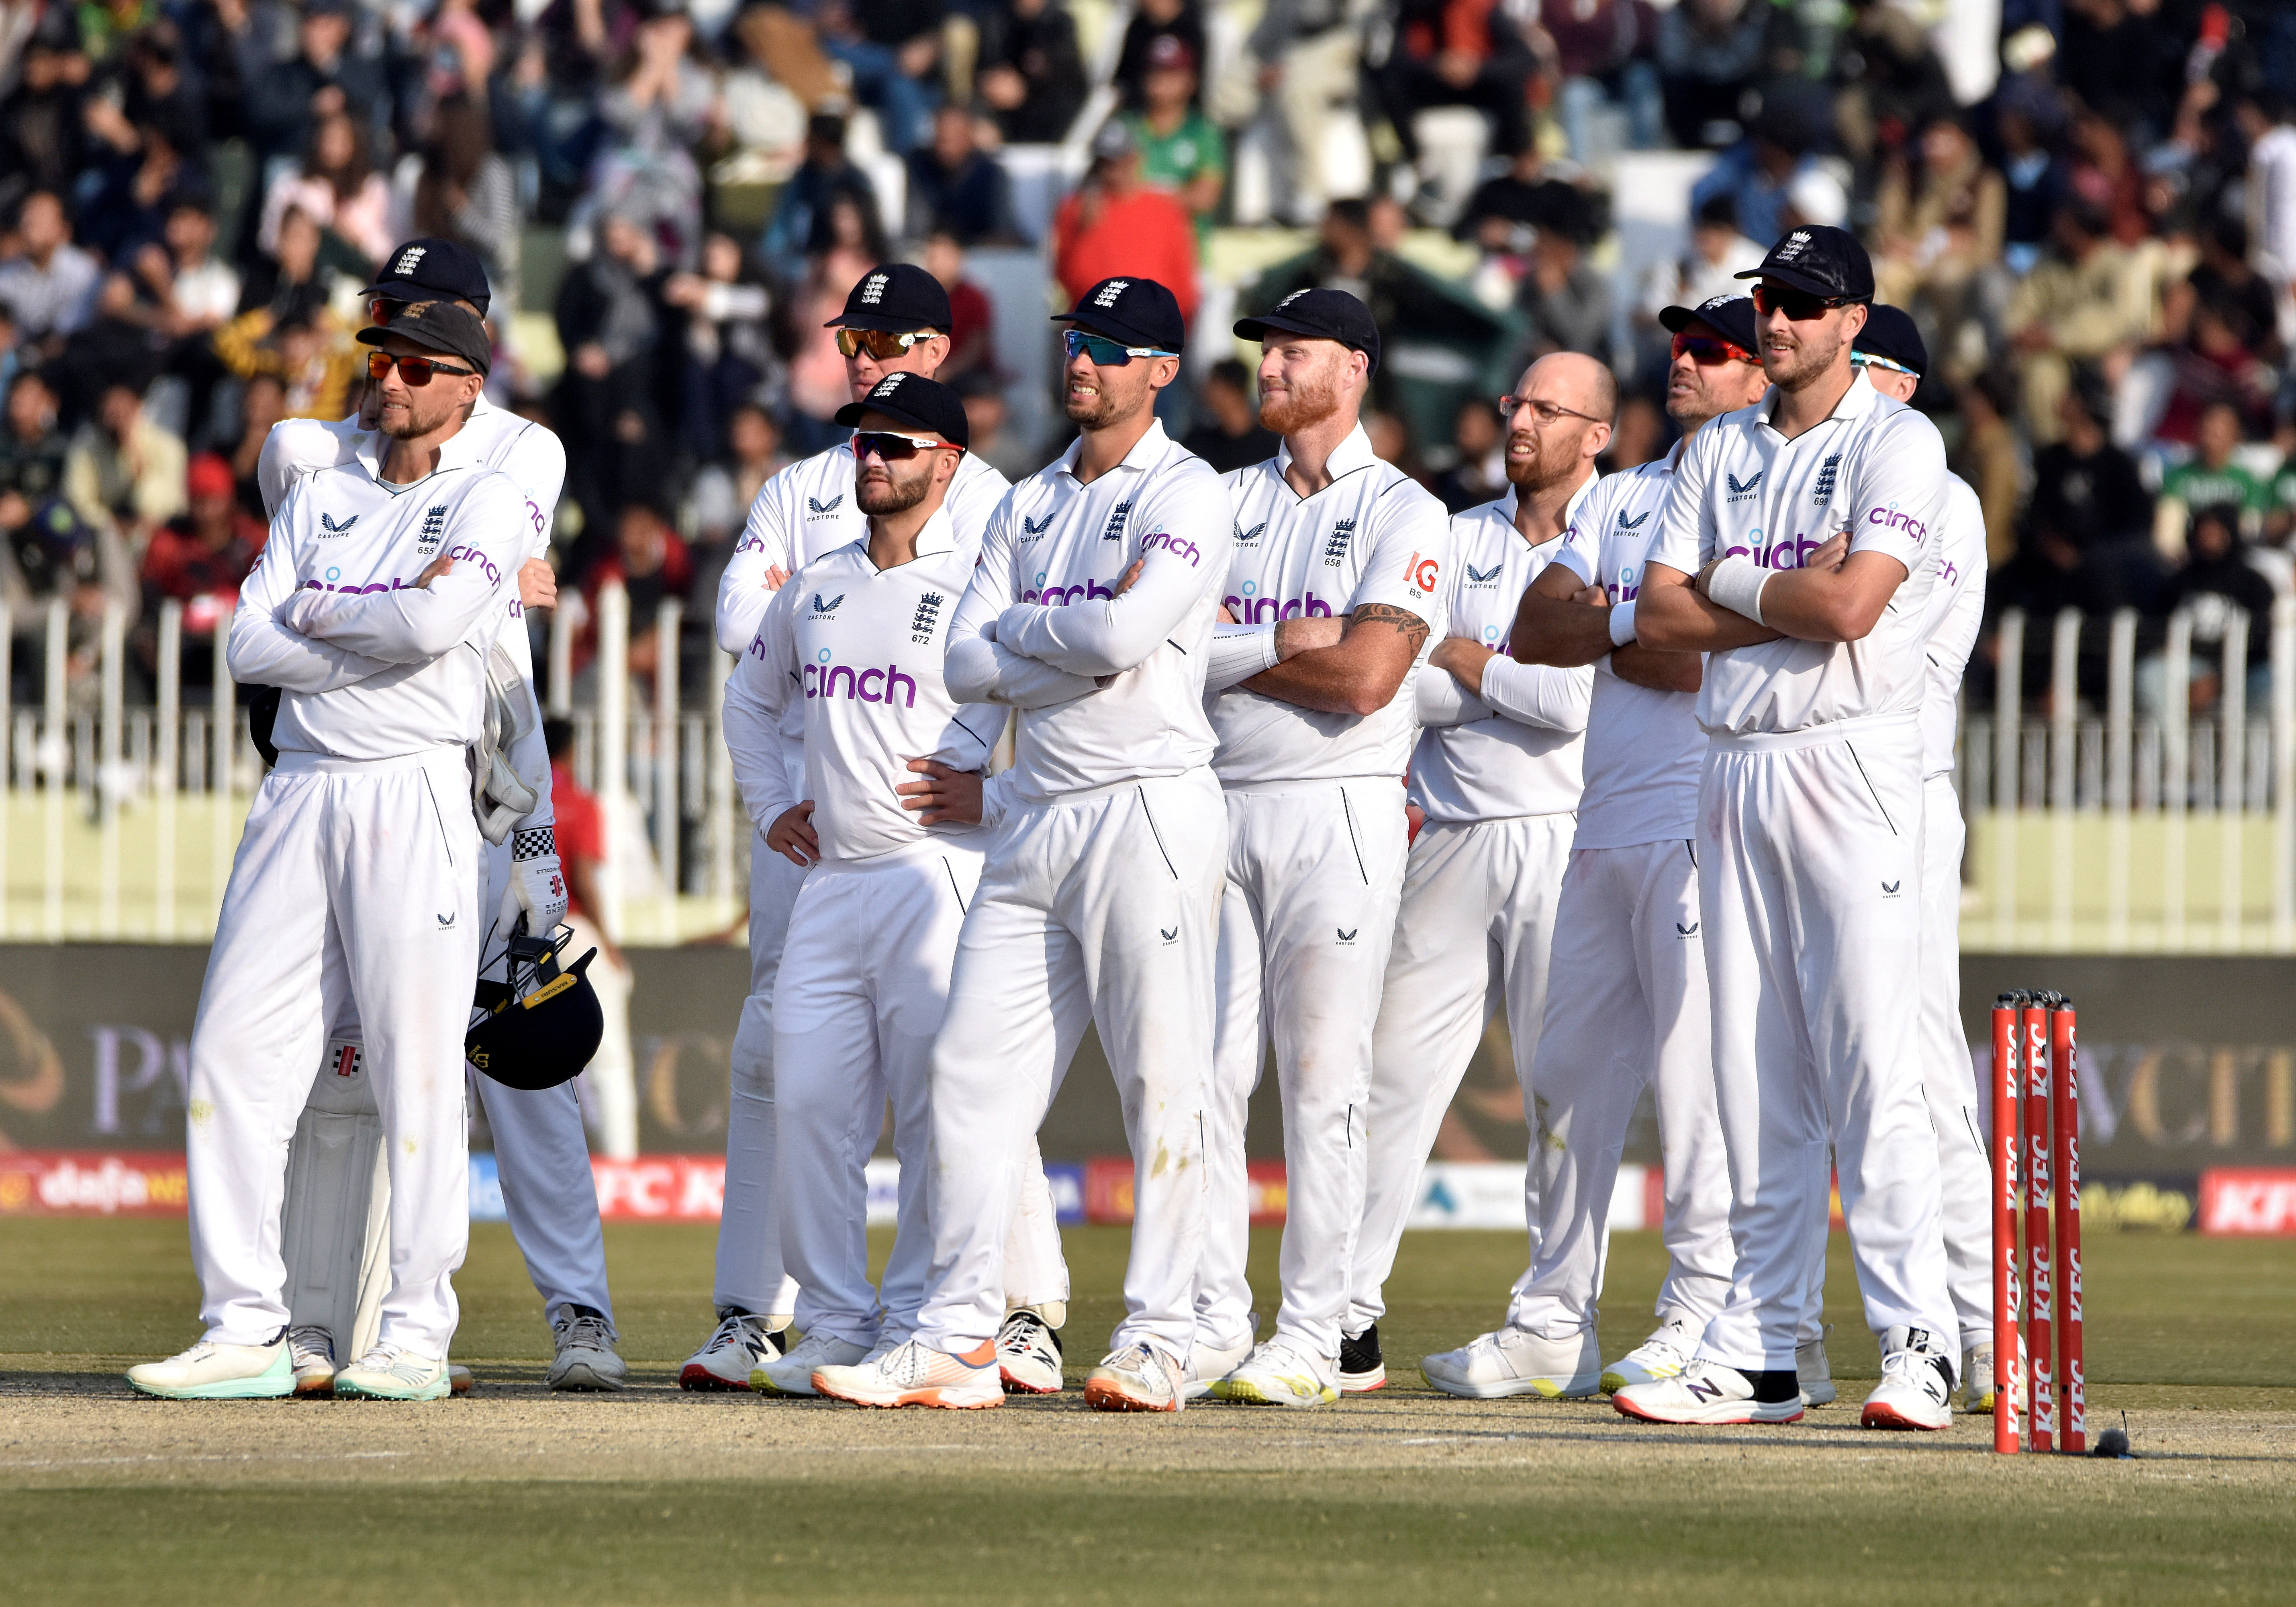 , England win epic First Test match against Pakistan in closing minutes of gruelling clash after final session heroics